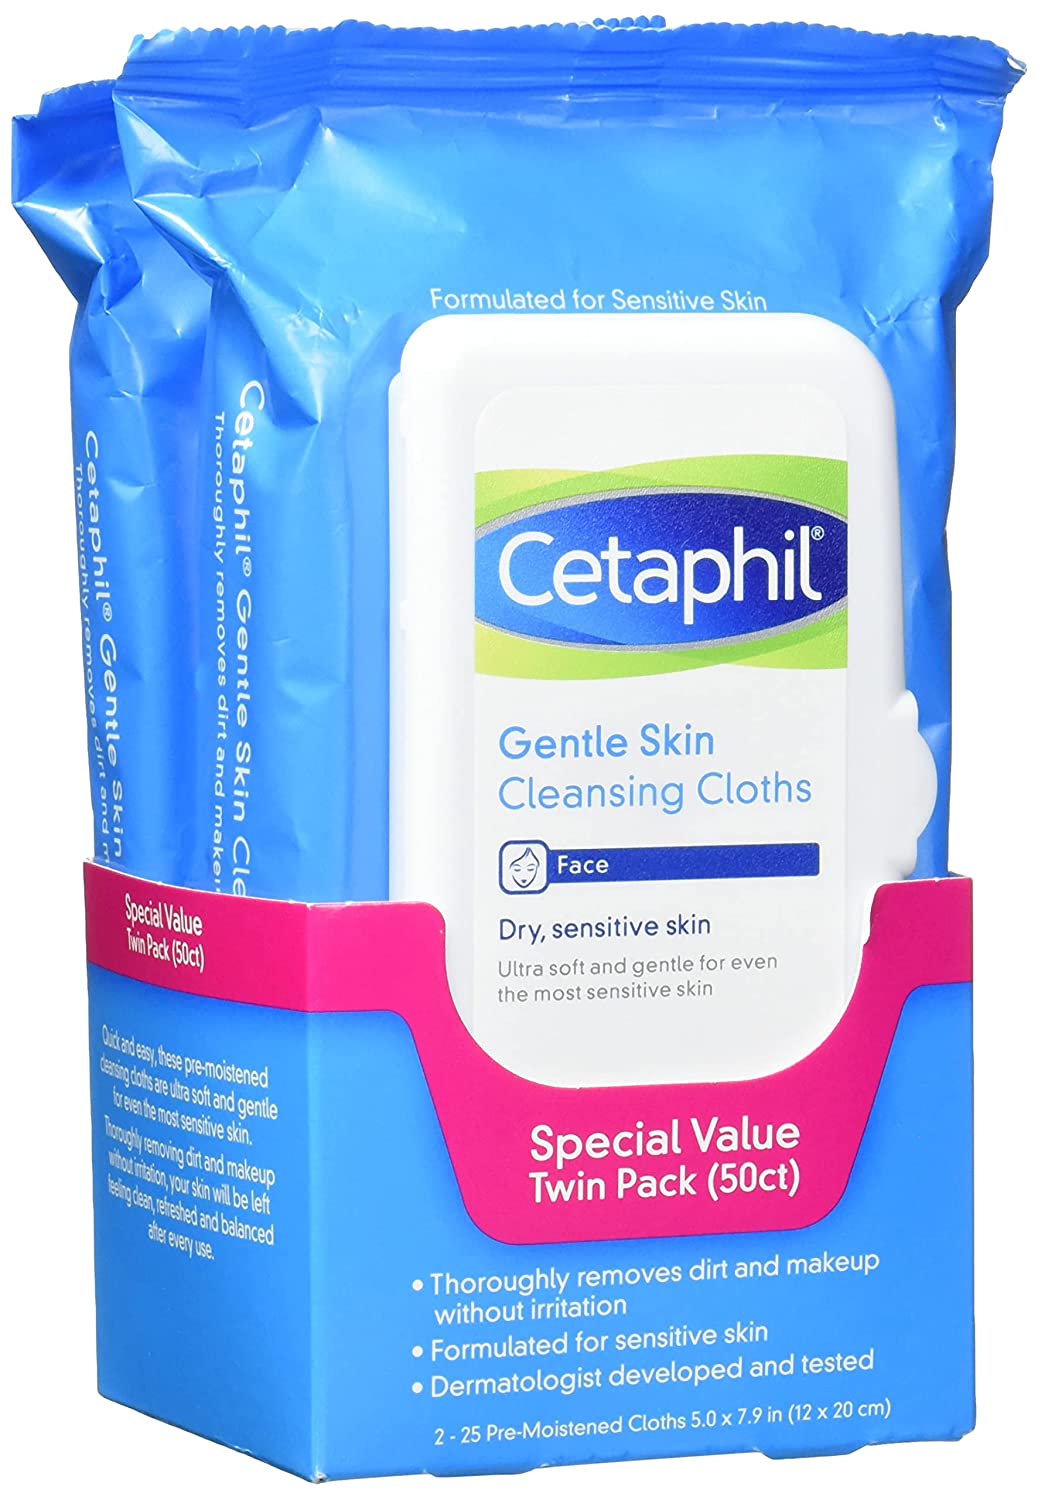 Gentle Skin Cleansing Cloths, 50 Count by Cetaphil